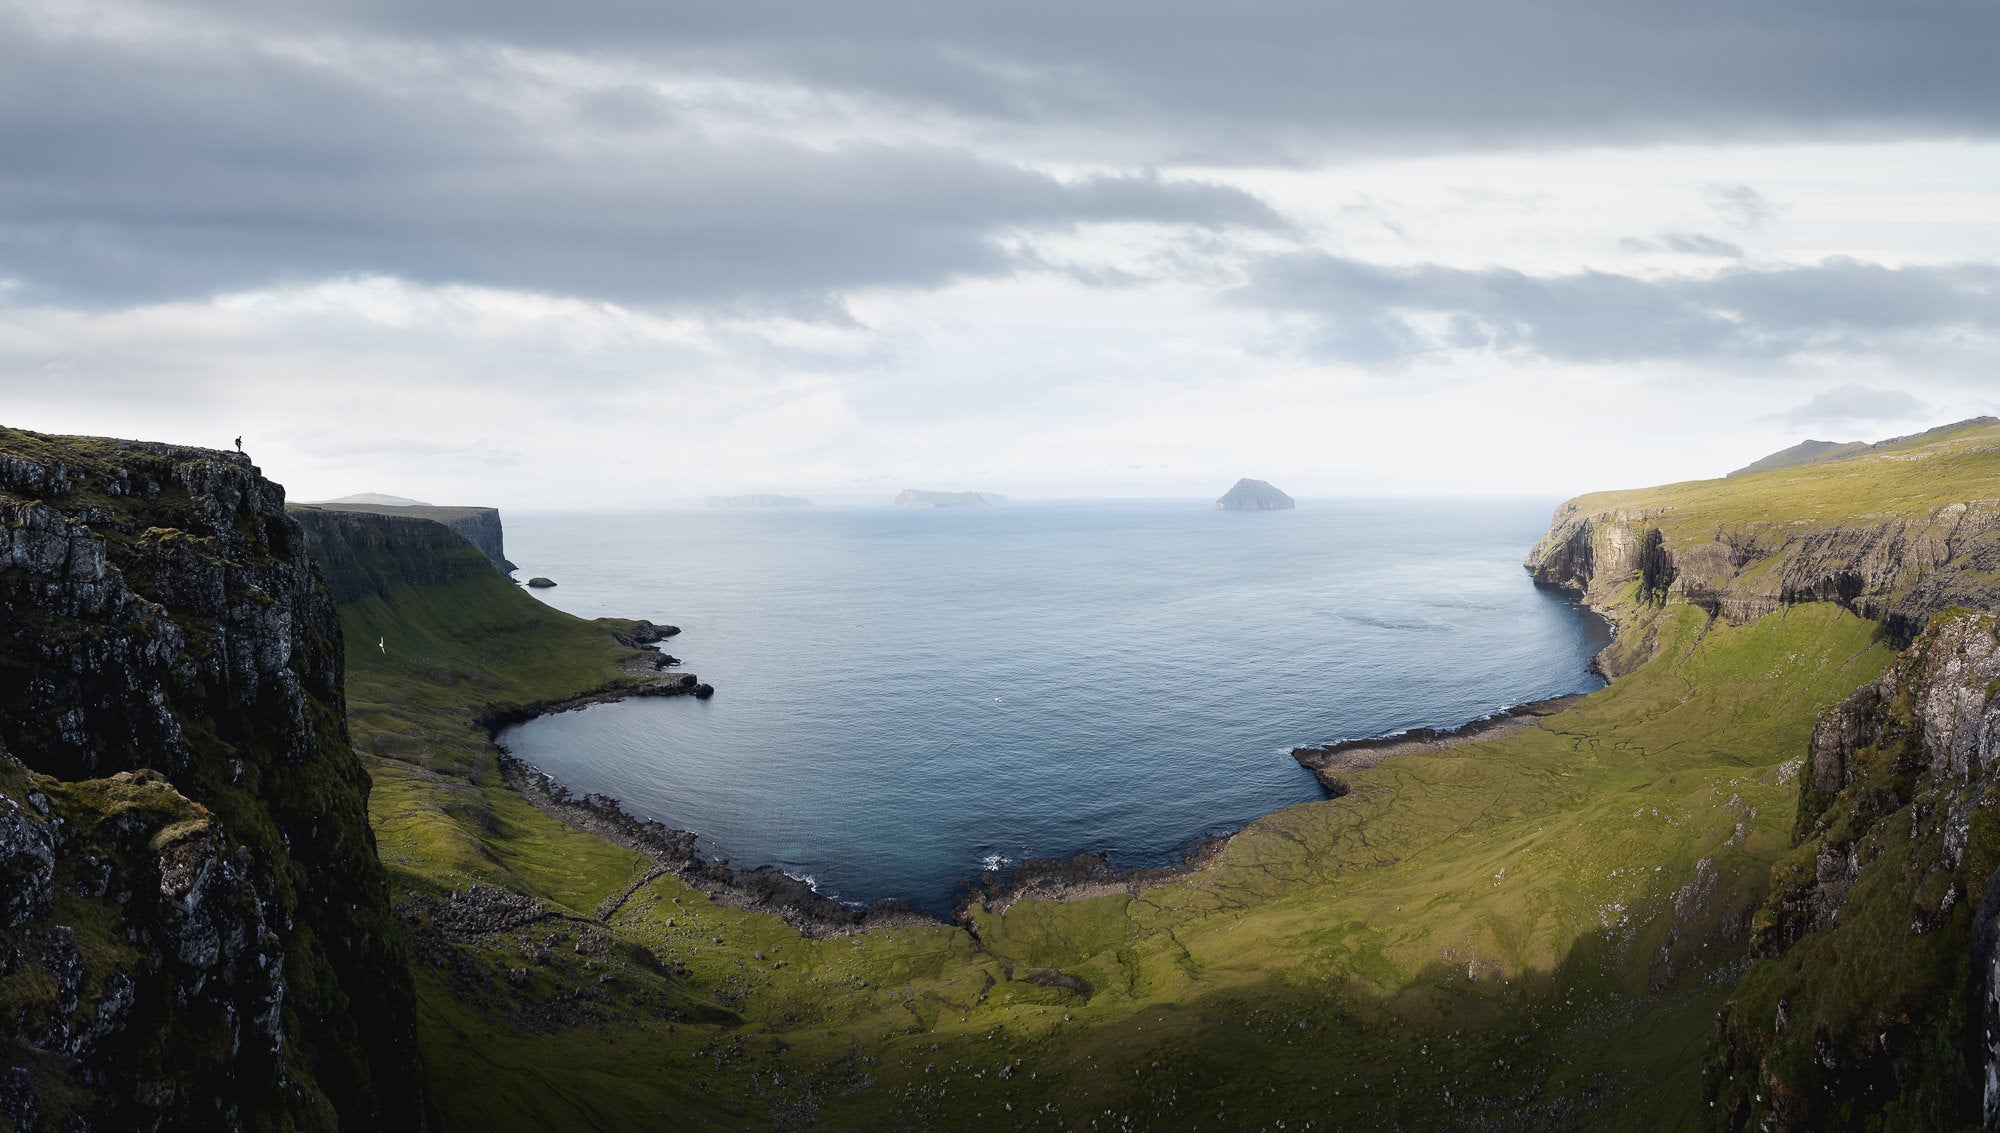 “Faroe Islands scale, stitching together 9 images for a wider view of this incredible landscape. Photo by Daryl Scott Walker. Sony Alpha 7 IV. Sony 16-35mm f/2.8 G Master. 1/1000-sec, f/2.8, ISO 100